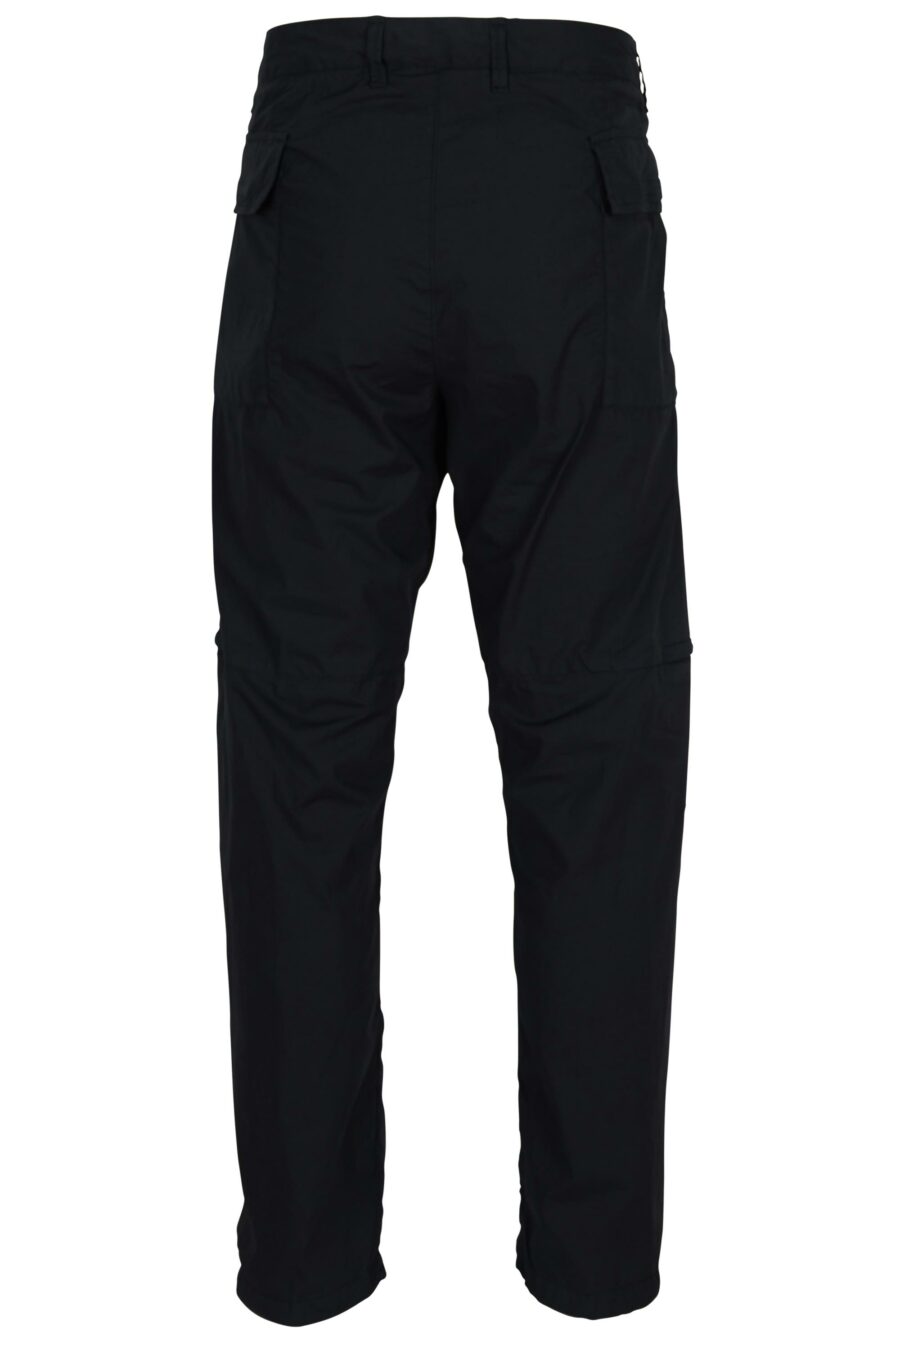 Dark blue "regular" trousers with logo compass patch - 8052572954948 1